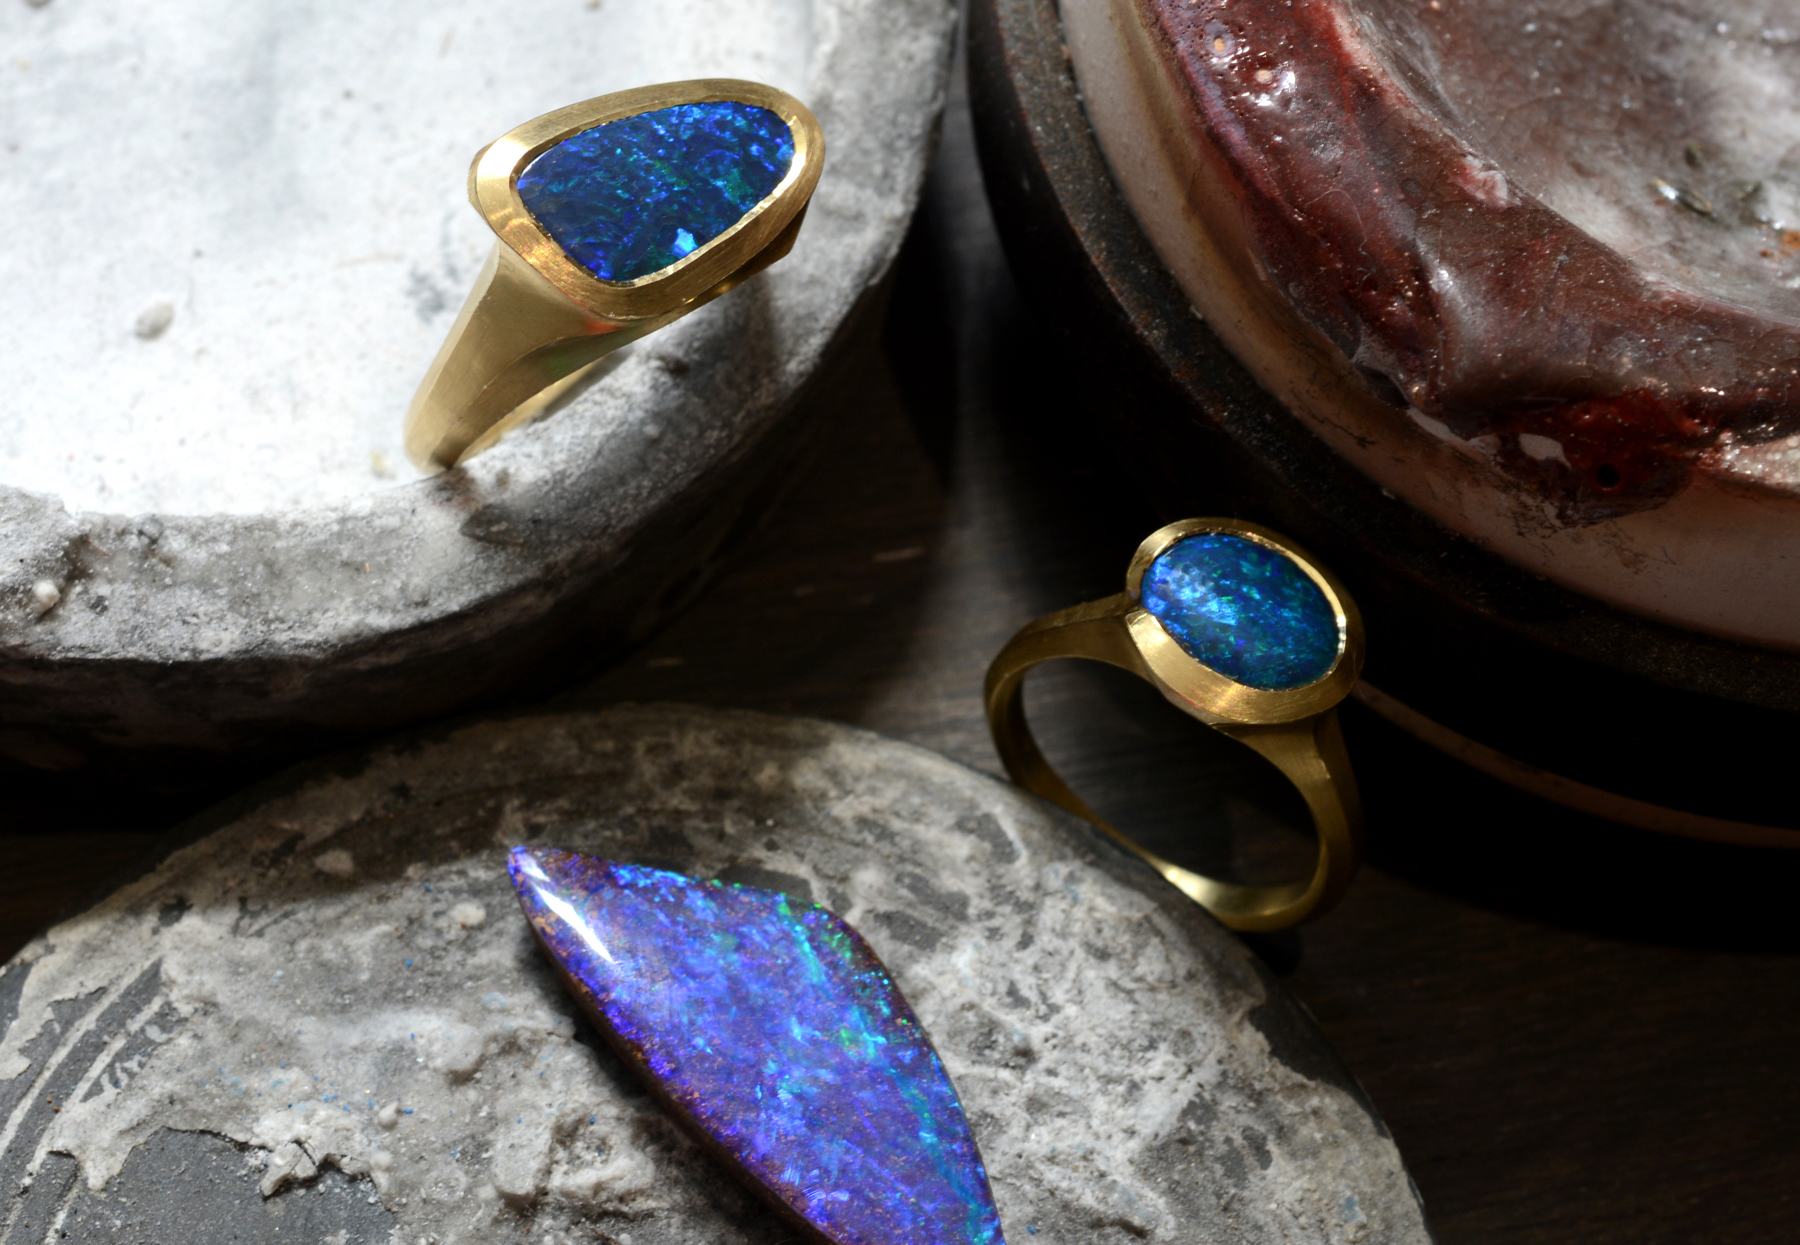 Black opal gemstones with hand-carved opal cocktail rings